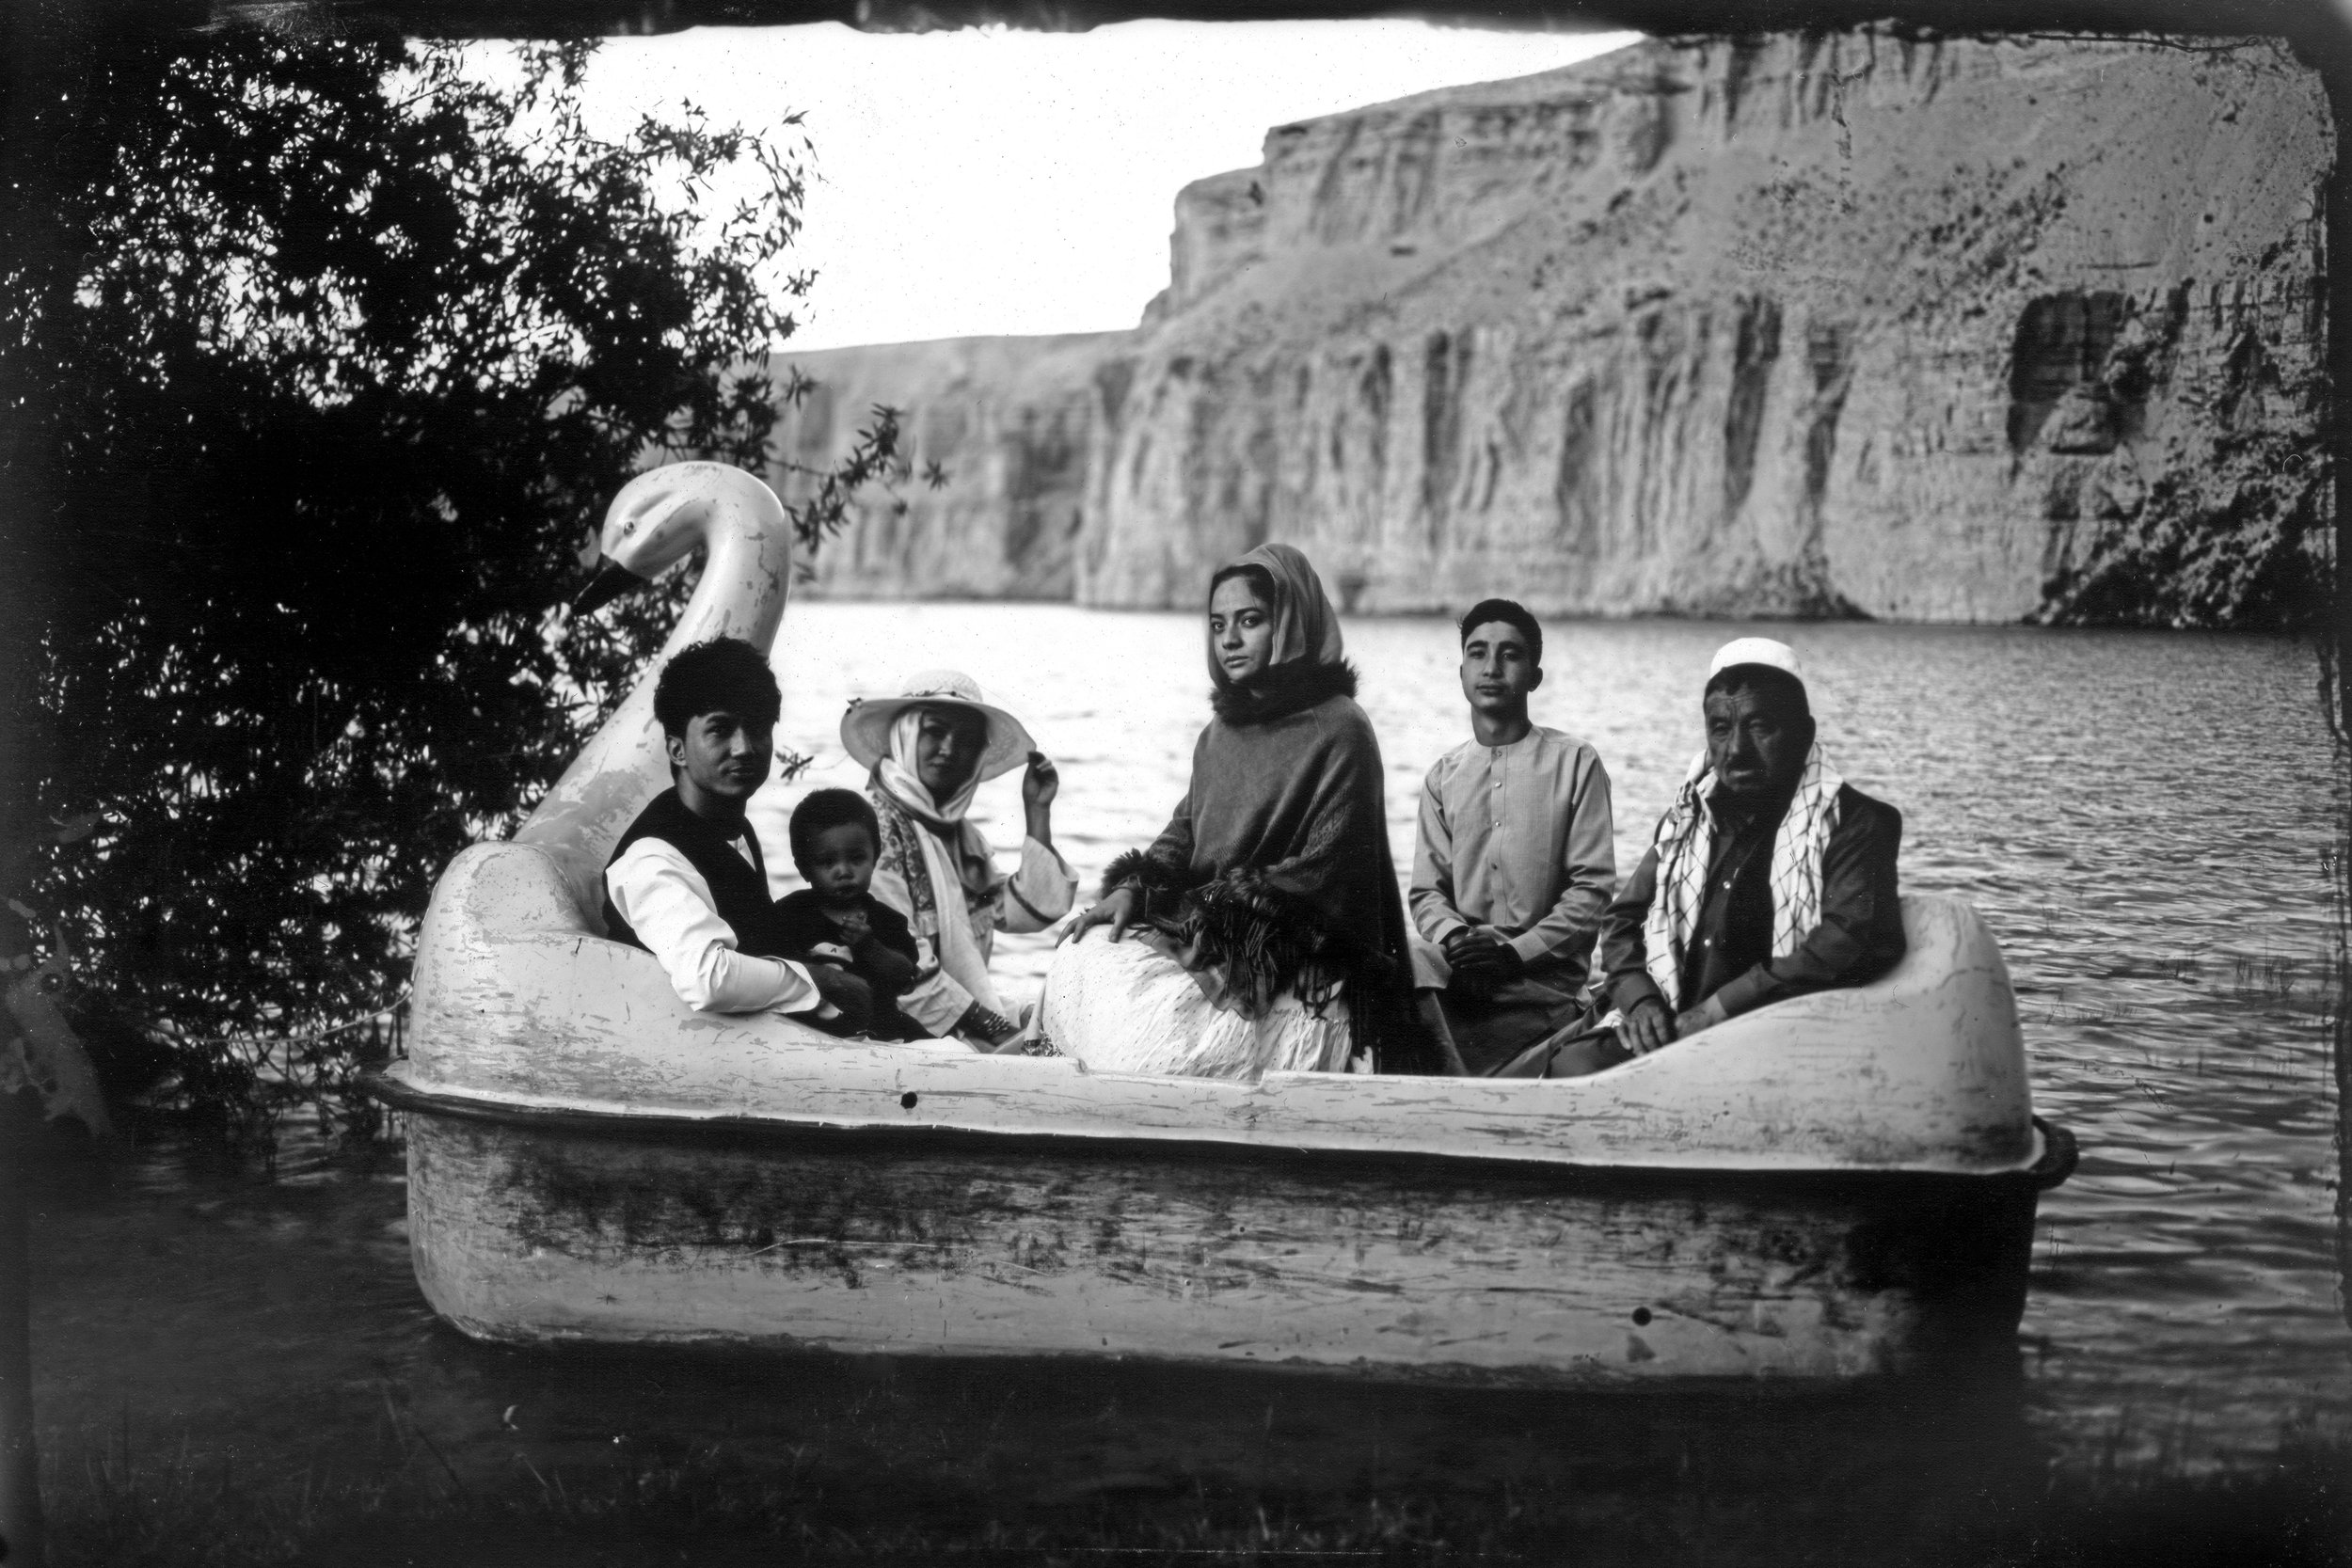  The Moradi family sits for a portrait on a small boat in Band-i-Mir lake, a tourist attraction in the Bamiyan Valley region in Afghanistan, on June 17, 2023. The family traveled there from far away Helmand for their summer vacation. This image was t